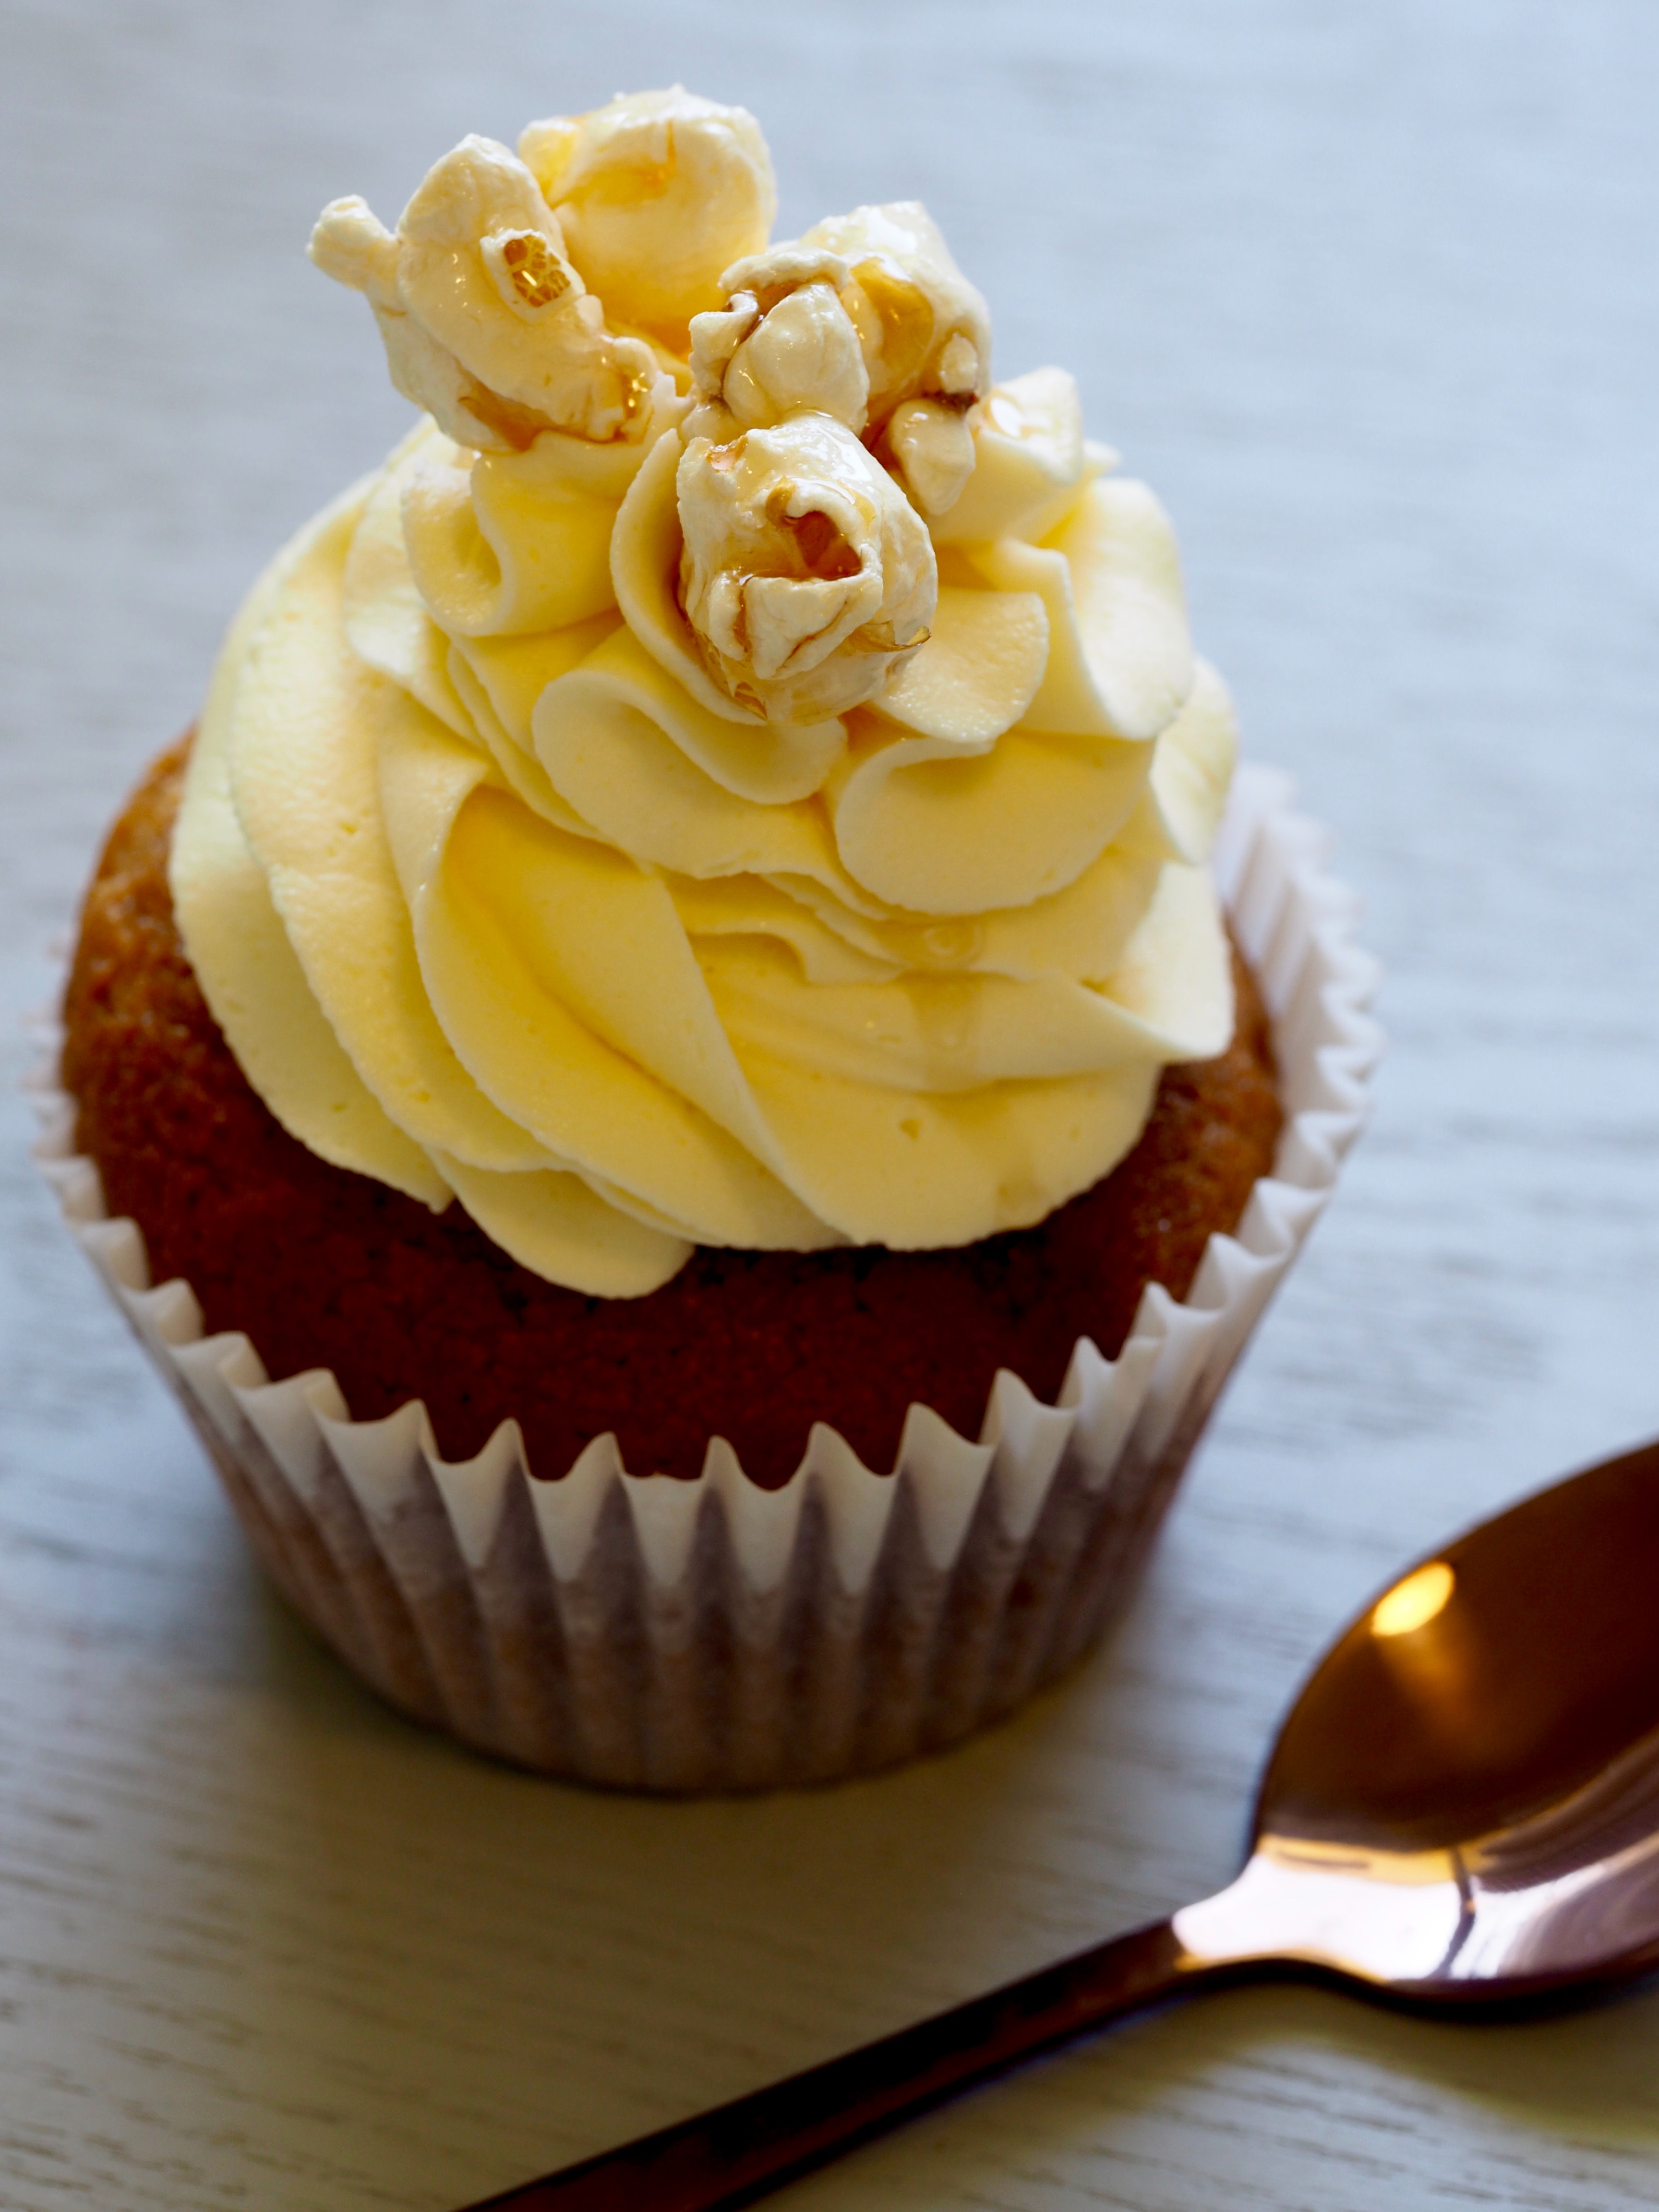 Chocolate cupcake with yellow icing on top photo